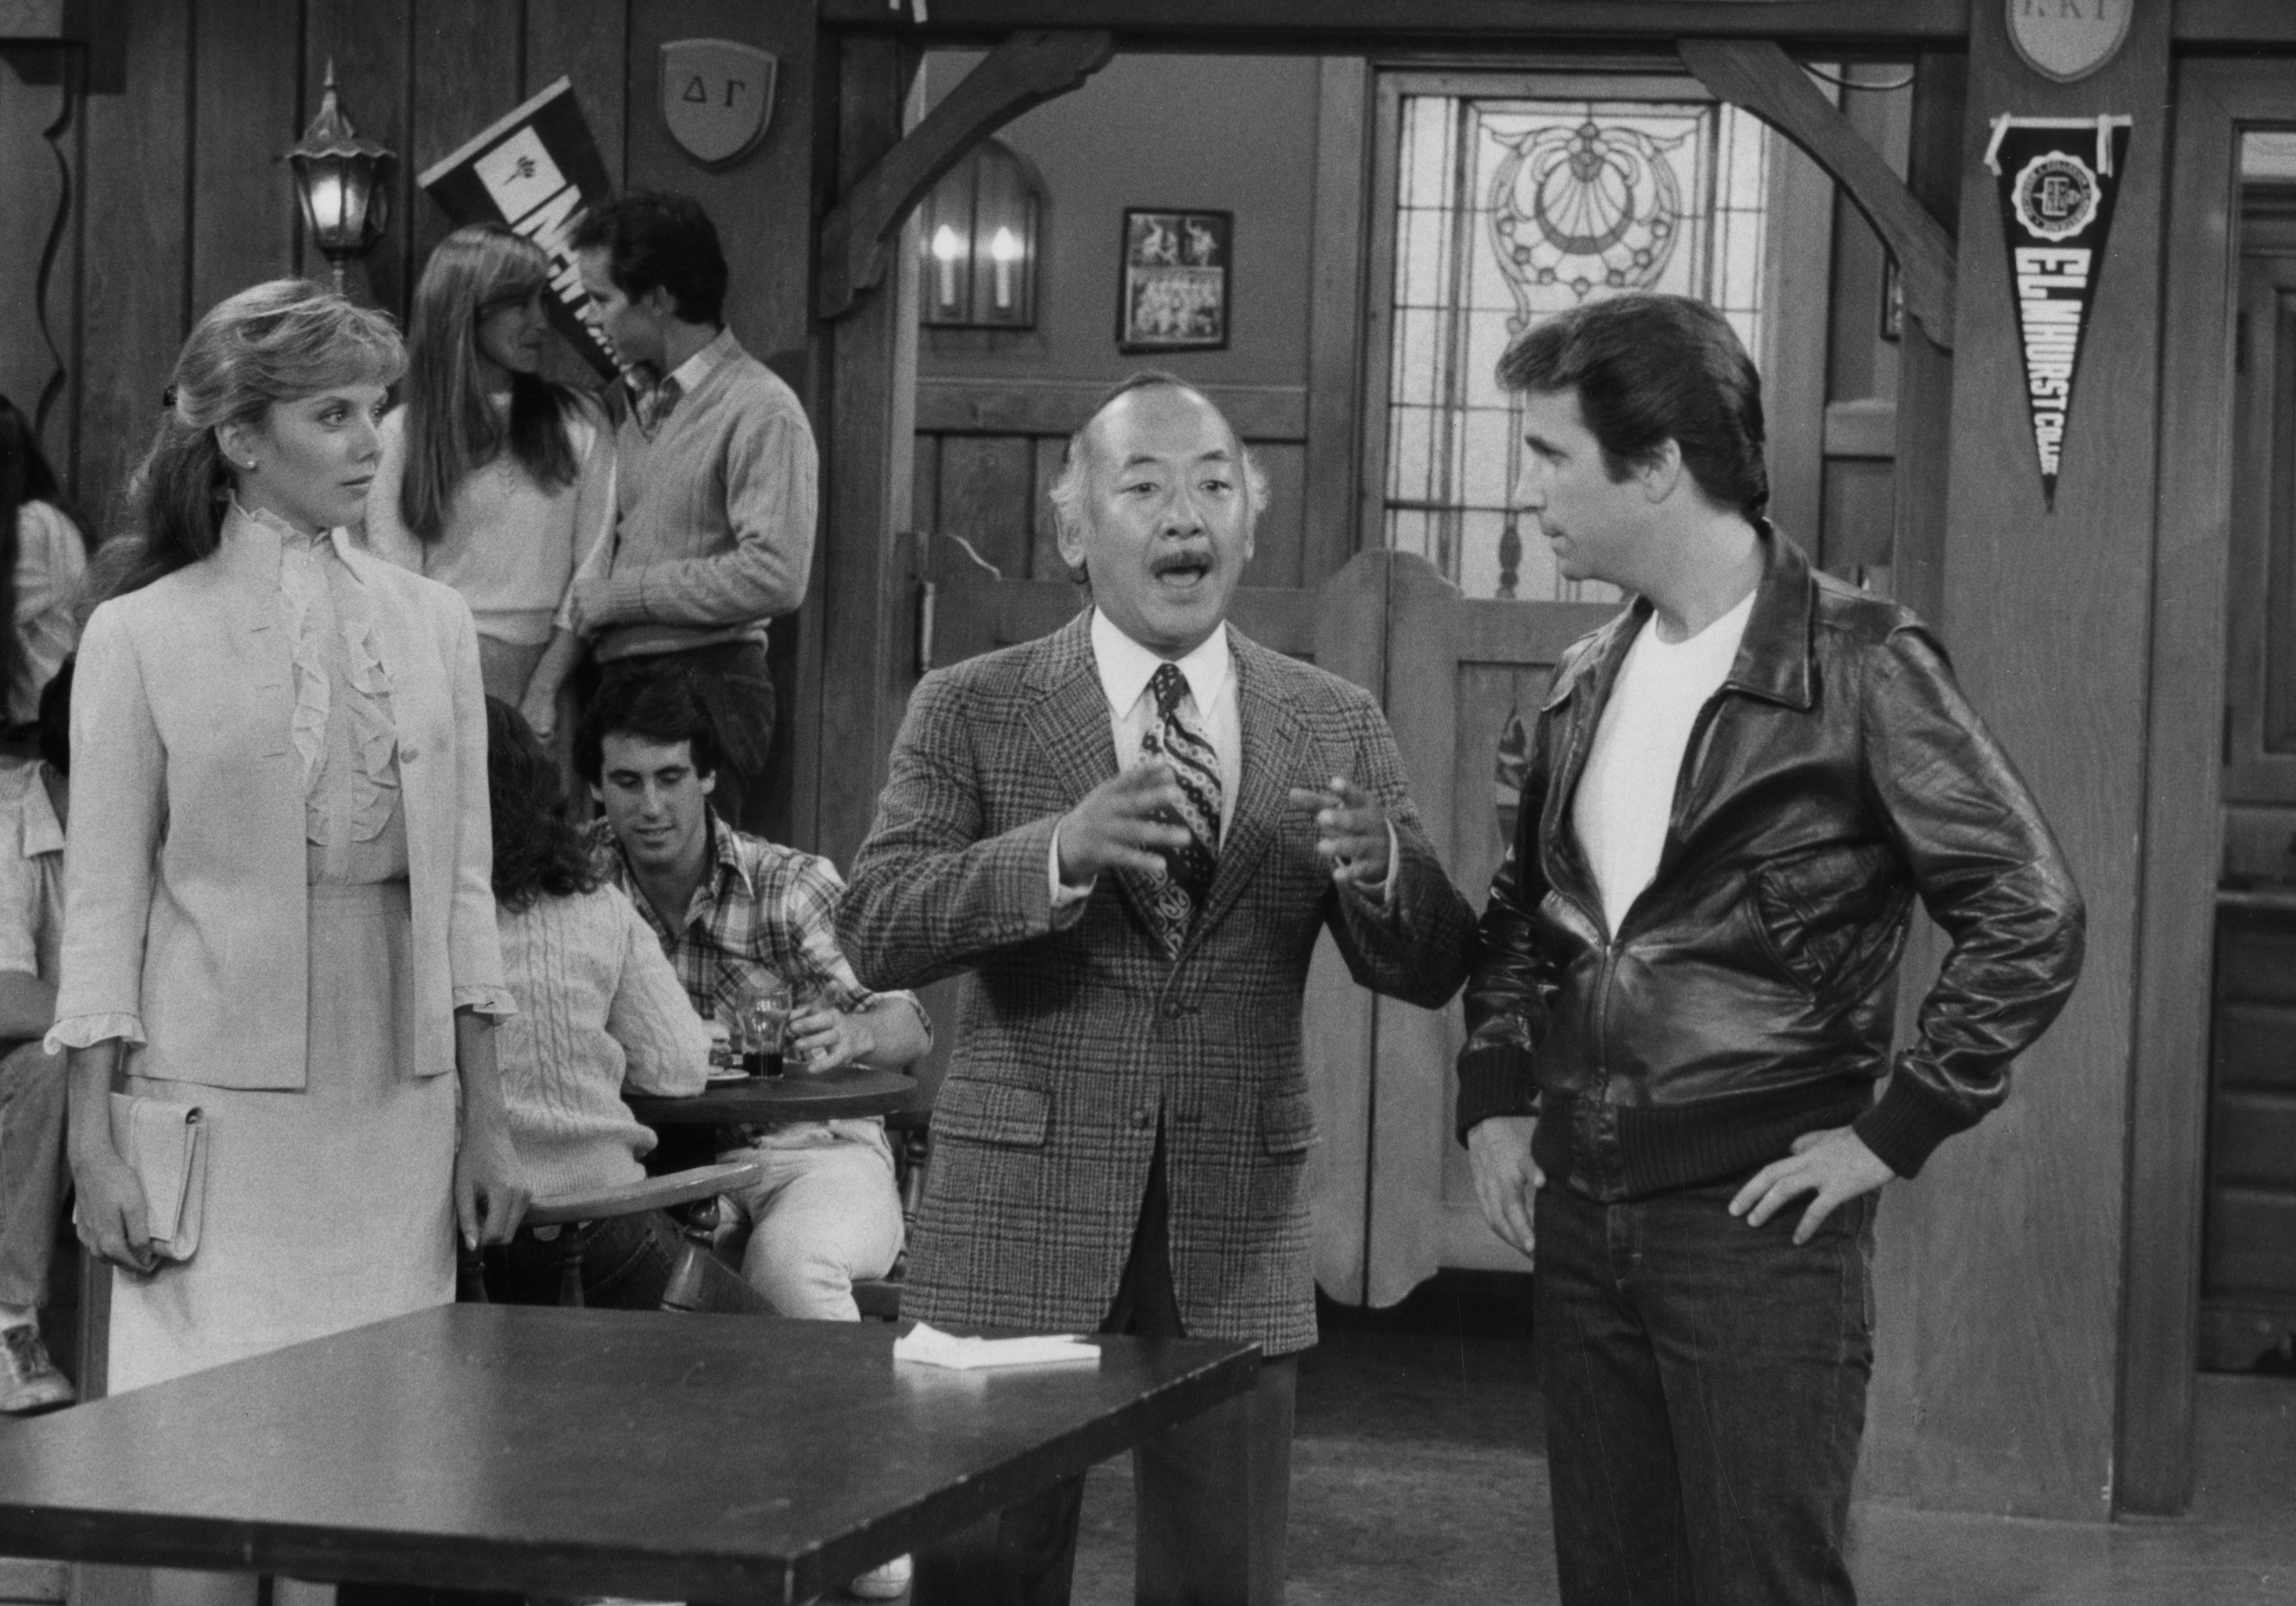 Pat Morita as Matsuo "Arnold" Takahashi in the television sitcom, "Happy Days" on October 19, 1982. | Source: Getty Images